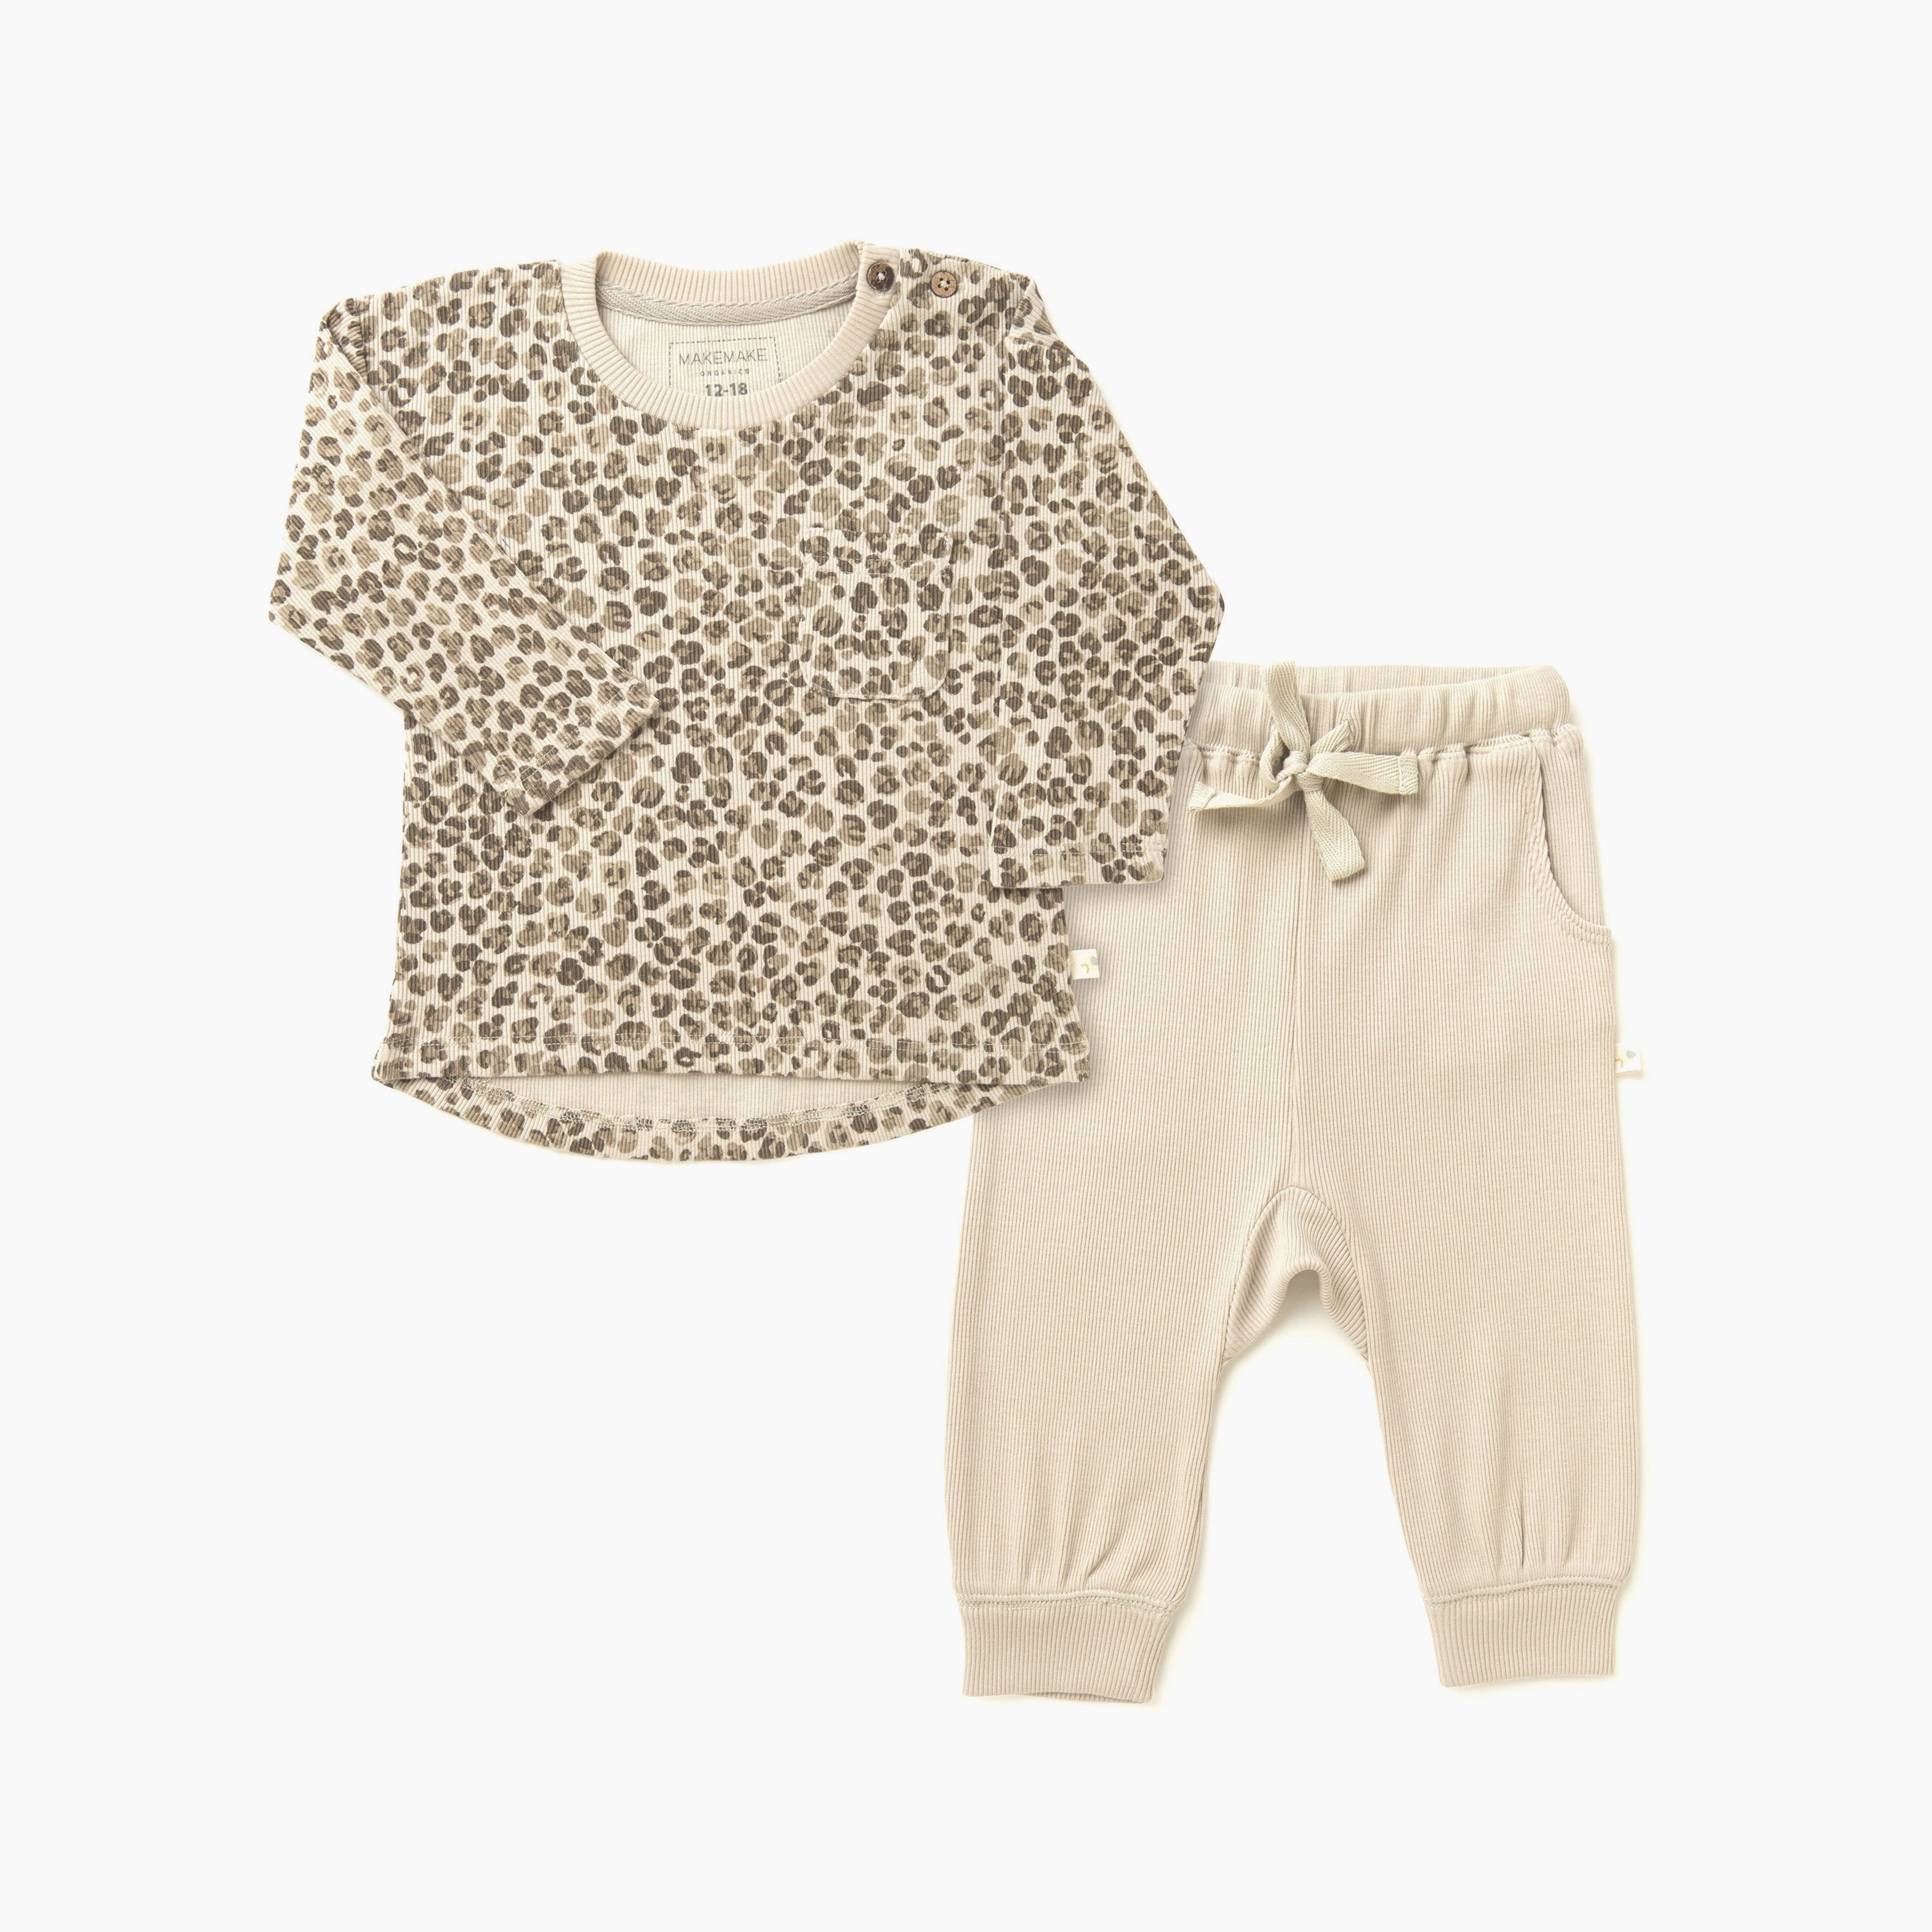 Organic Tee & Pant Set - Spotted